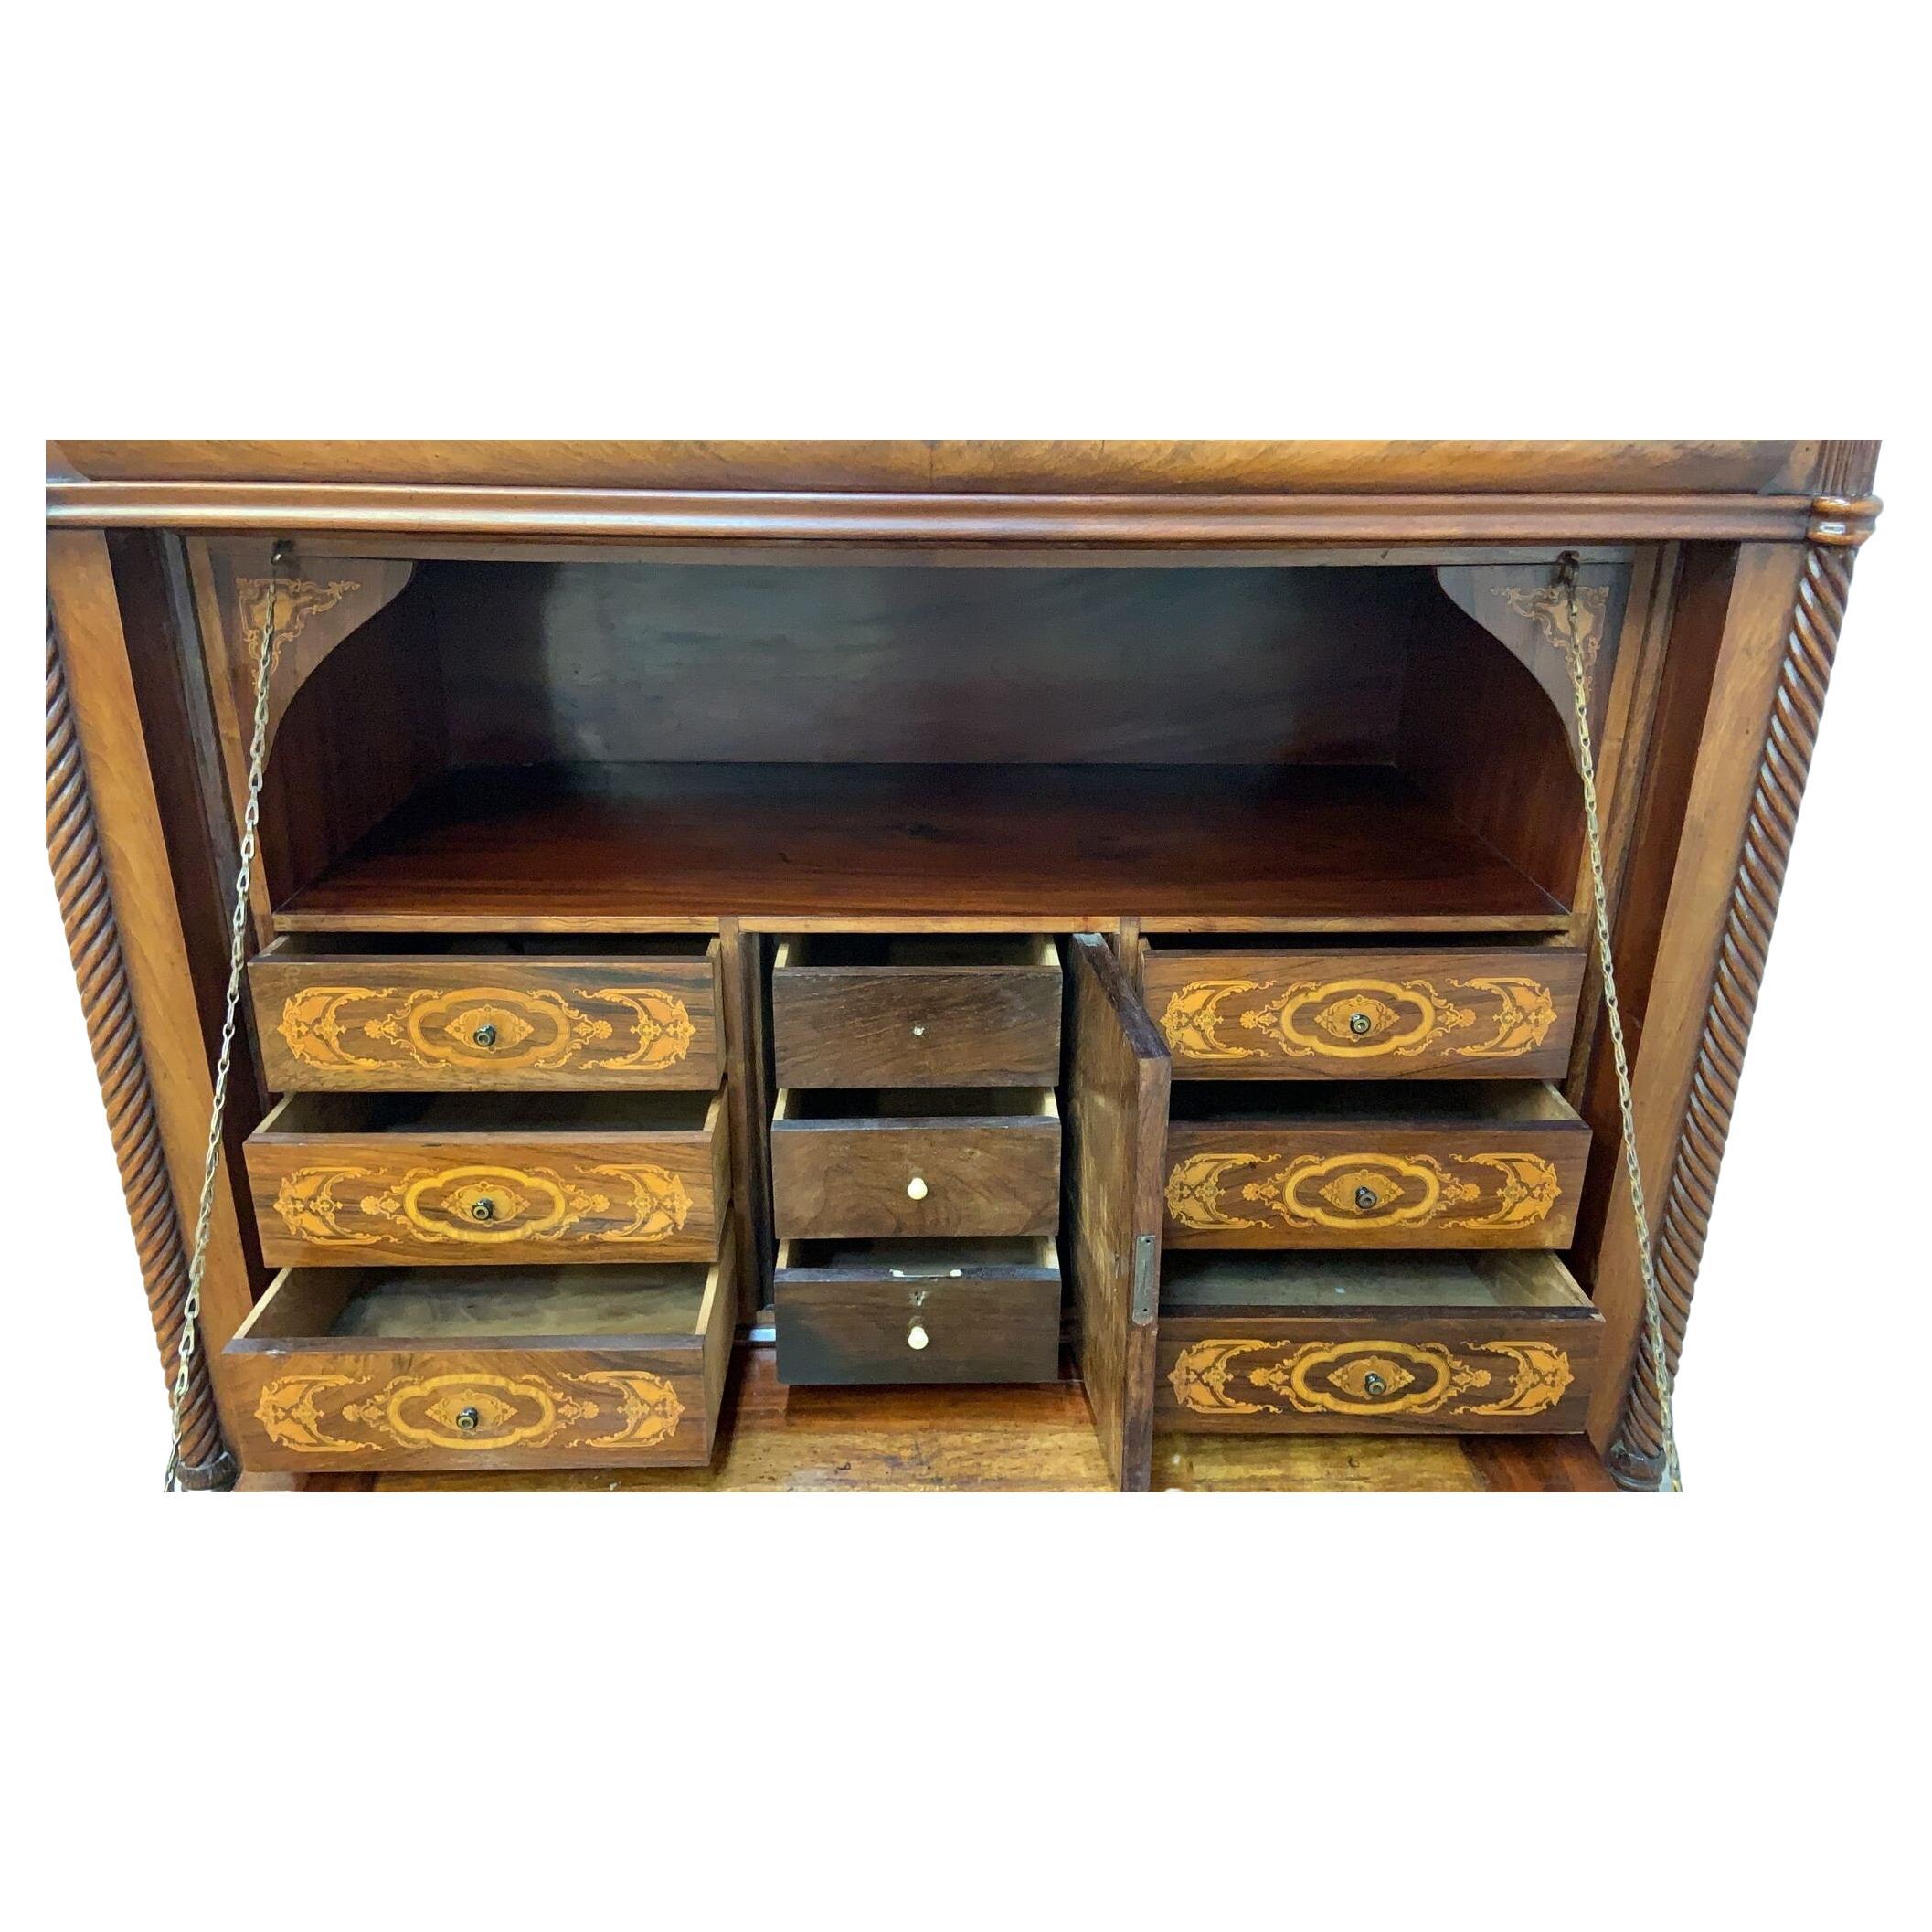 Antique Danish Louis Philippe Empire Style Mahogany Secretary Desk

This exquisite 19th-century secretary desk beautifully combines the influence of the Louis Philippe and Danish Empire styles, resulting in a piece of timeless elegance. Crafted from